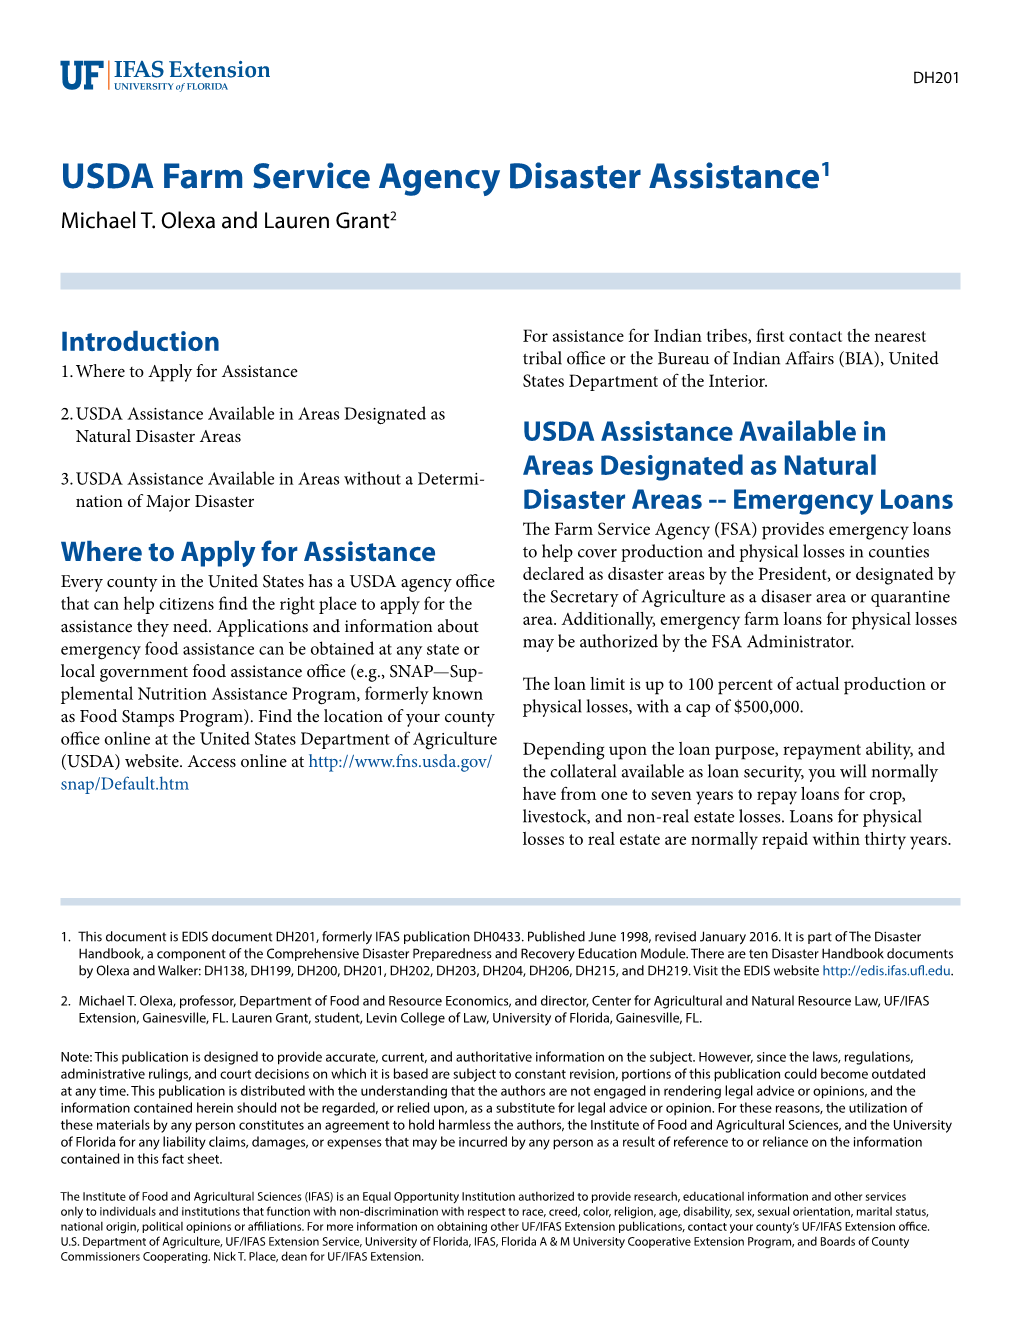 USDA Farm Service Agency Disaster Assistance1 Michael T